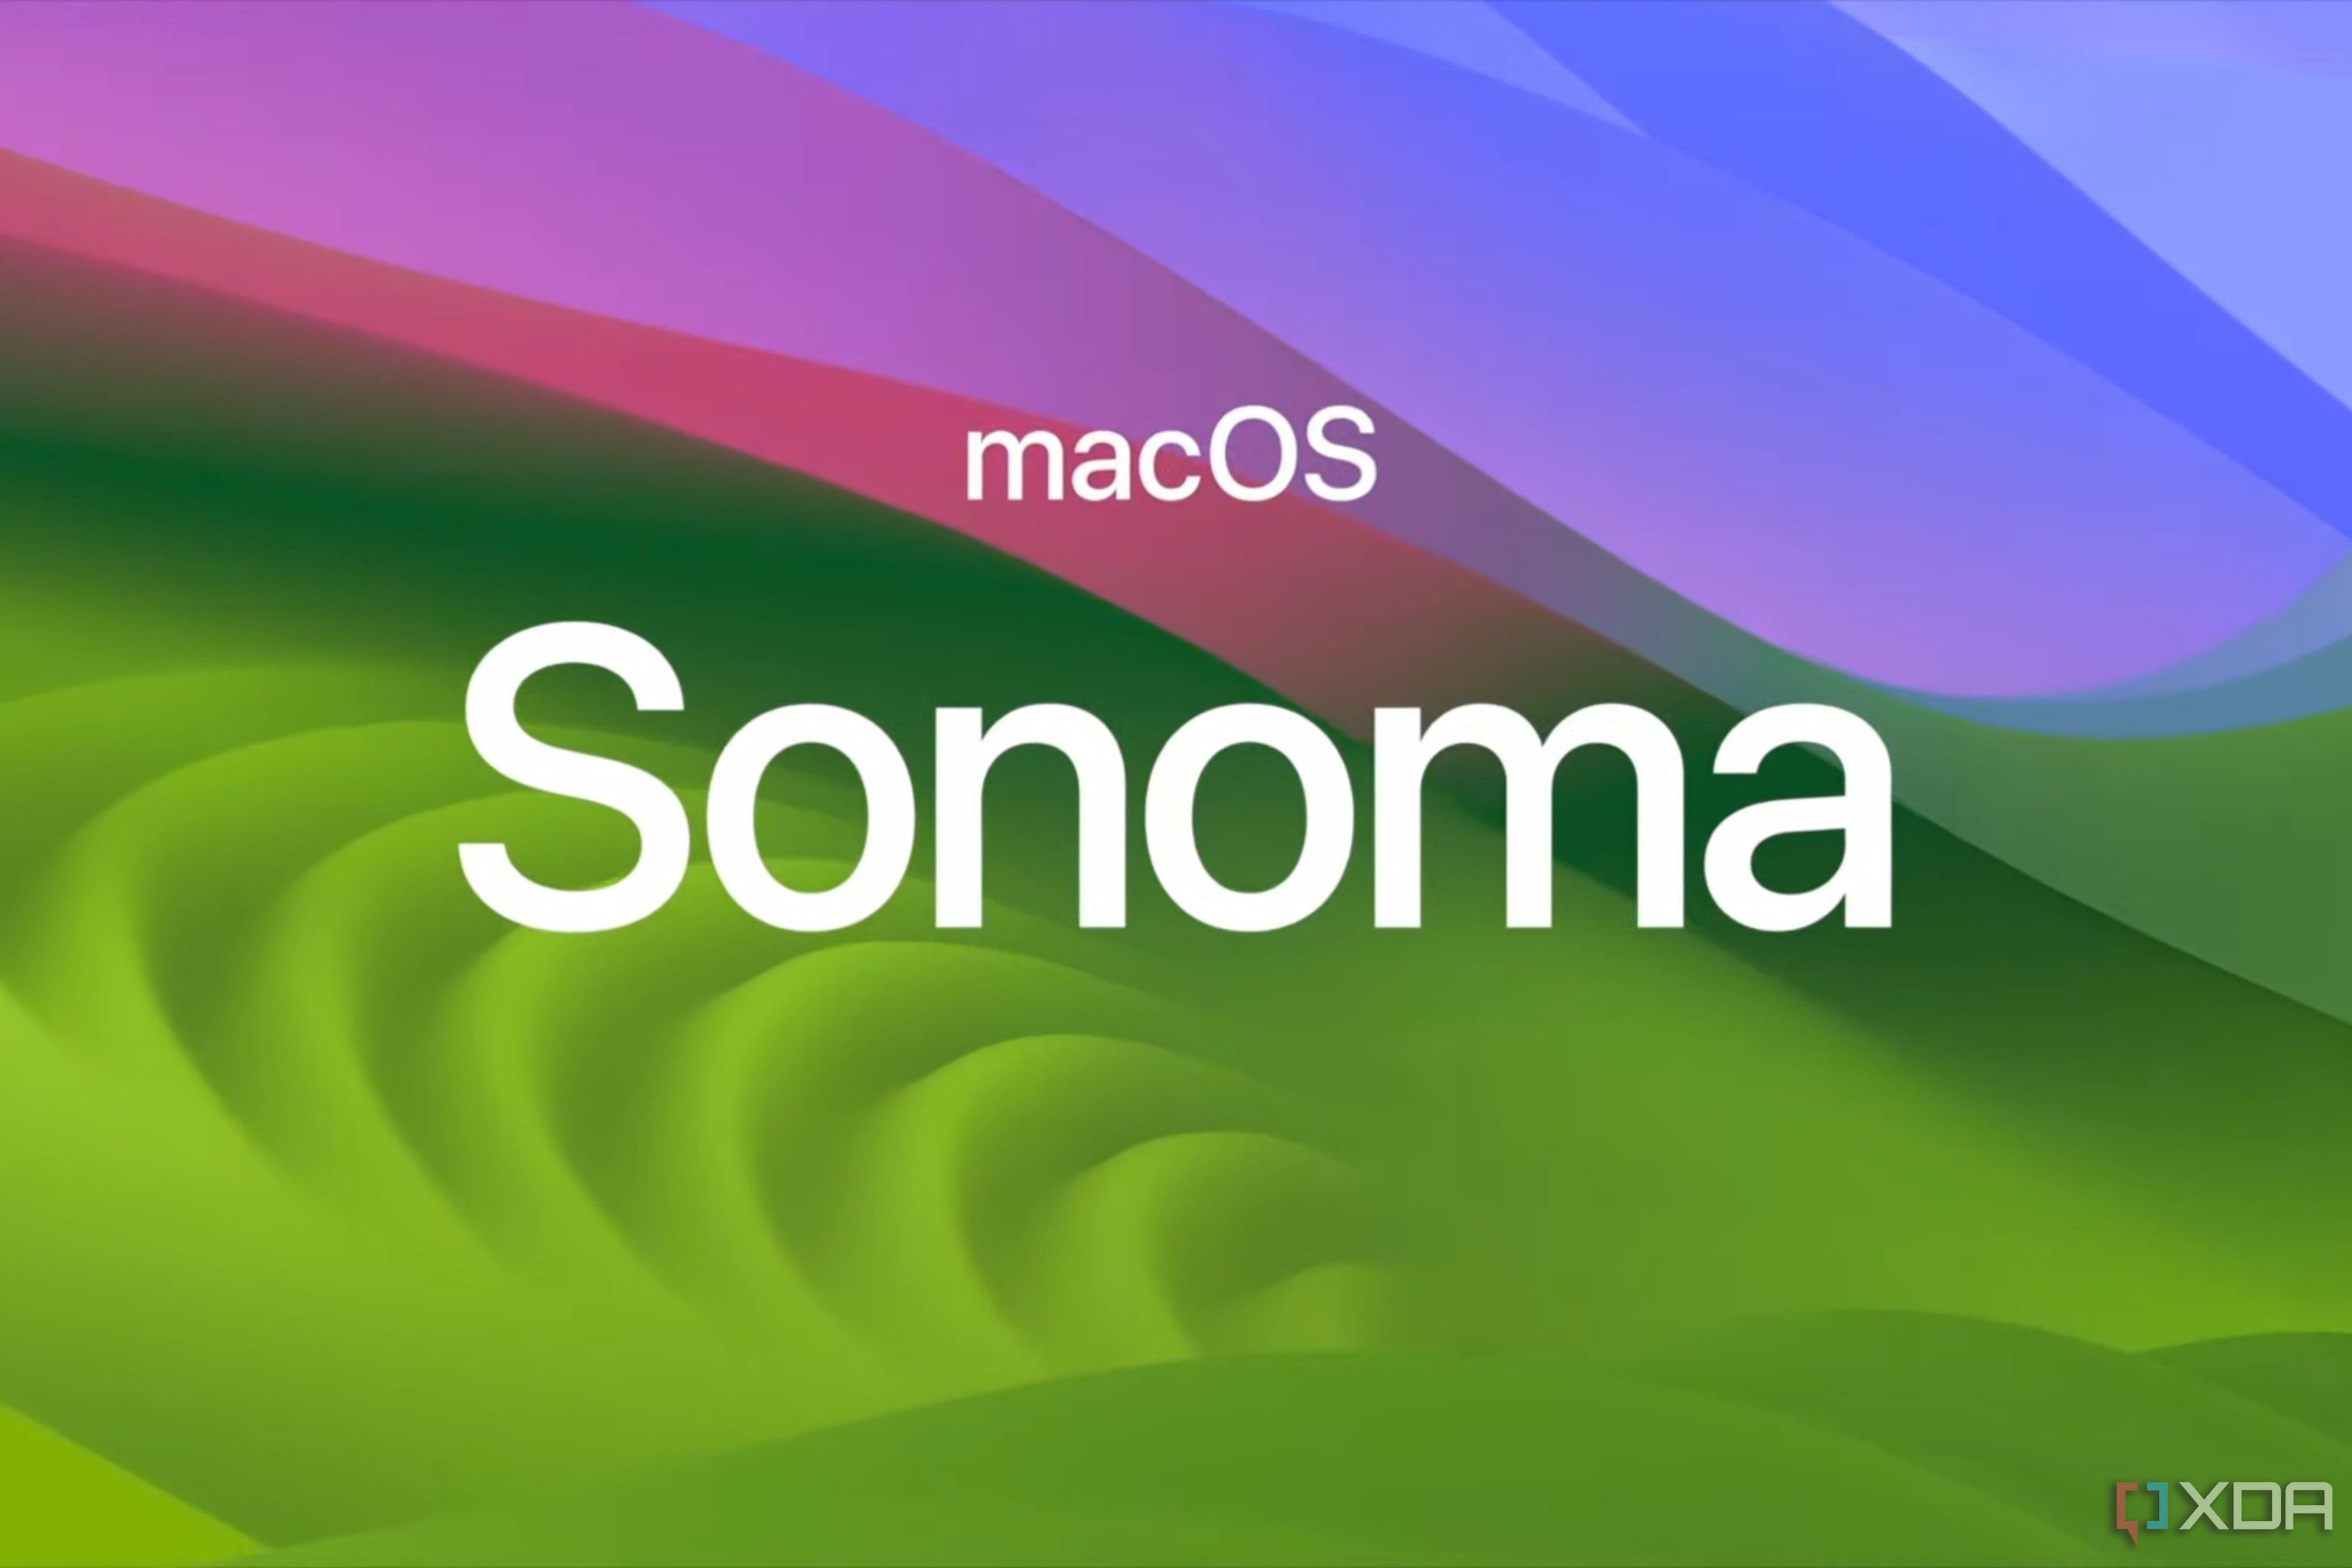 Text reading macOS Sonoma over a colorful background